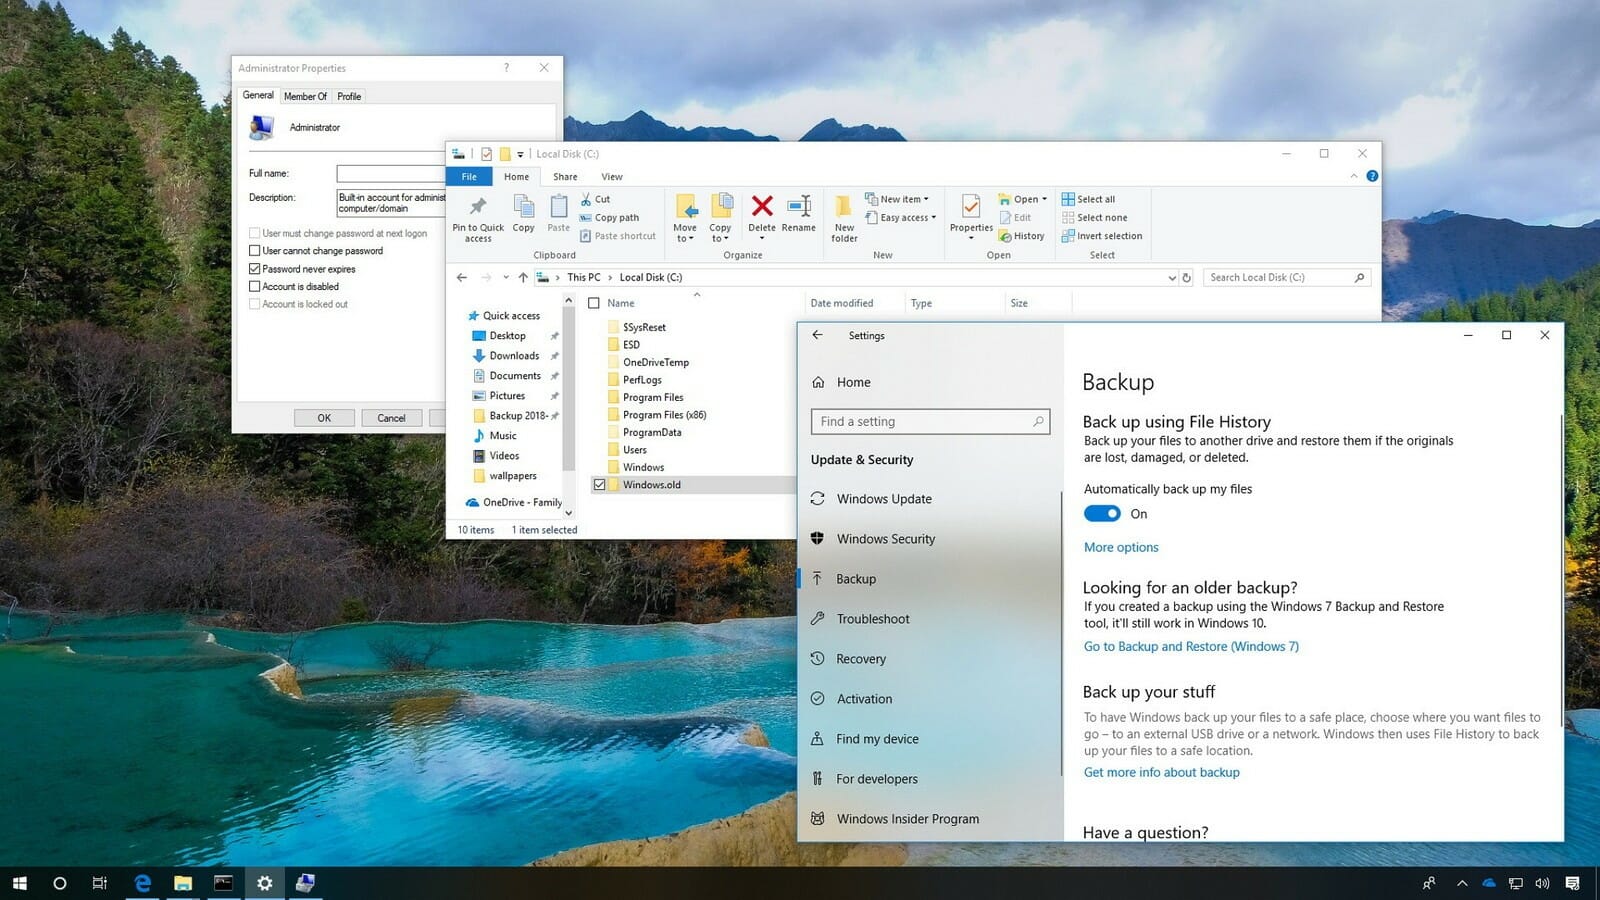 Microsoft’s new free tool for recuperating files from Windows